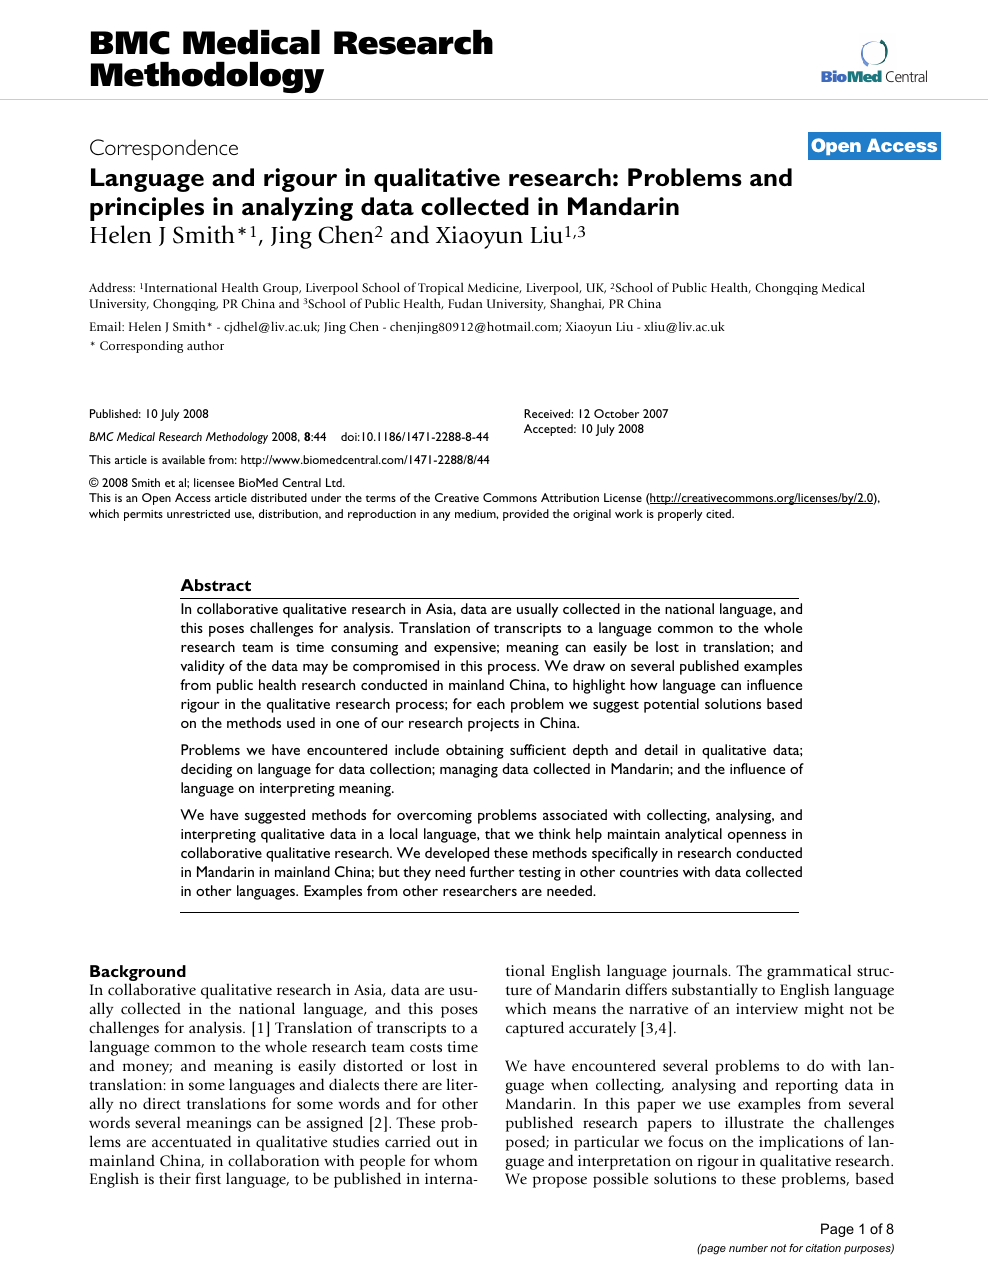 Language And Rigour In Qualitative Research Problems And Principles In Analyzing Data Collected In Mandarin Topic Of Research Paper In Psychology Download Scholarly Article Pdf And Read For Free On Cyberleninka